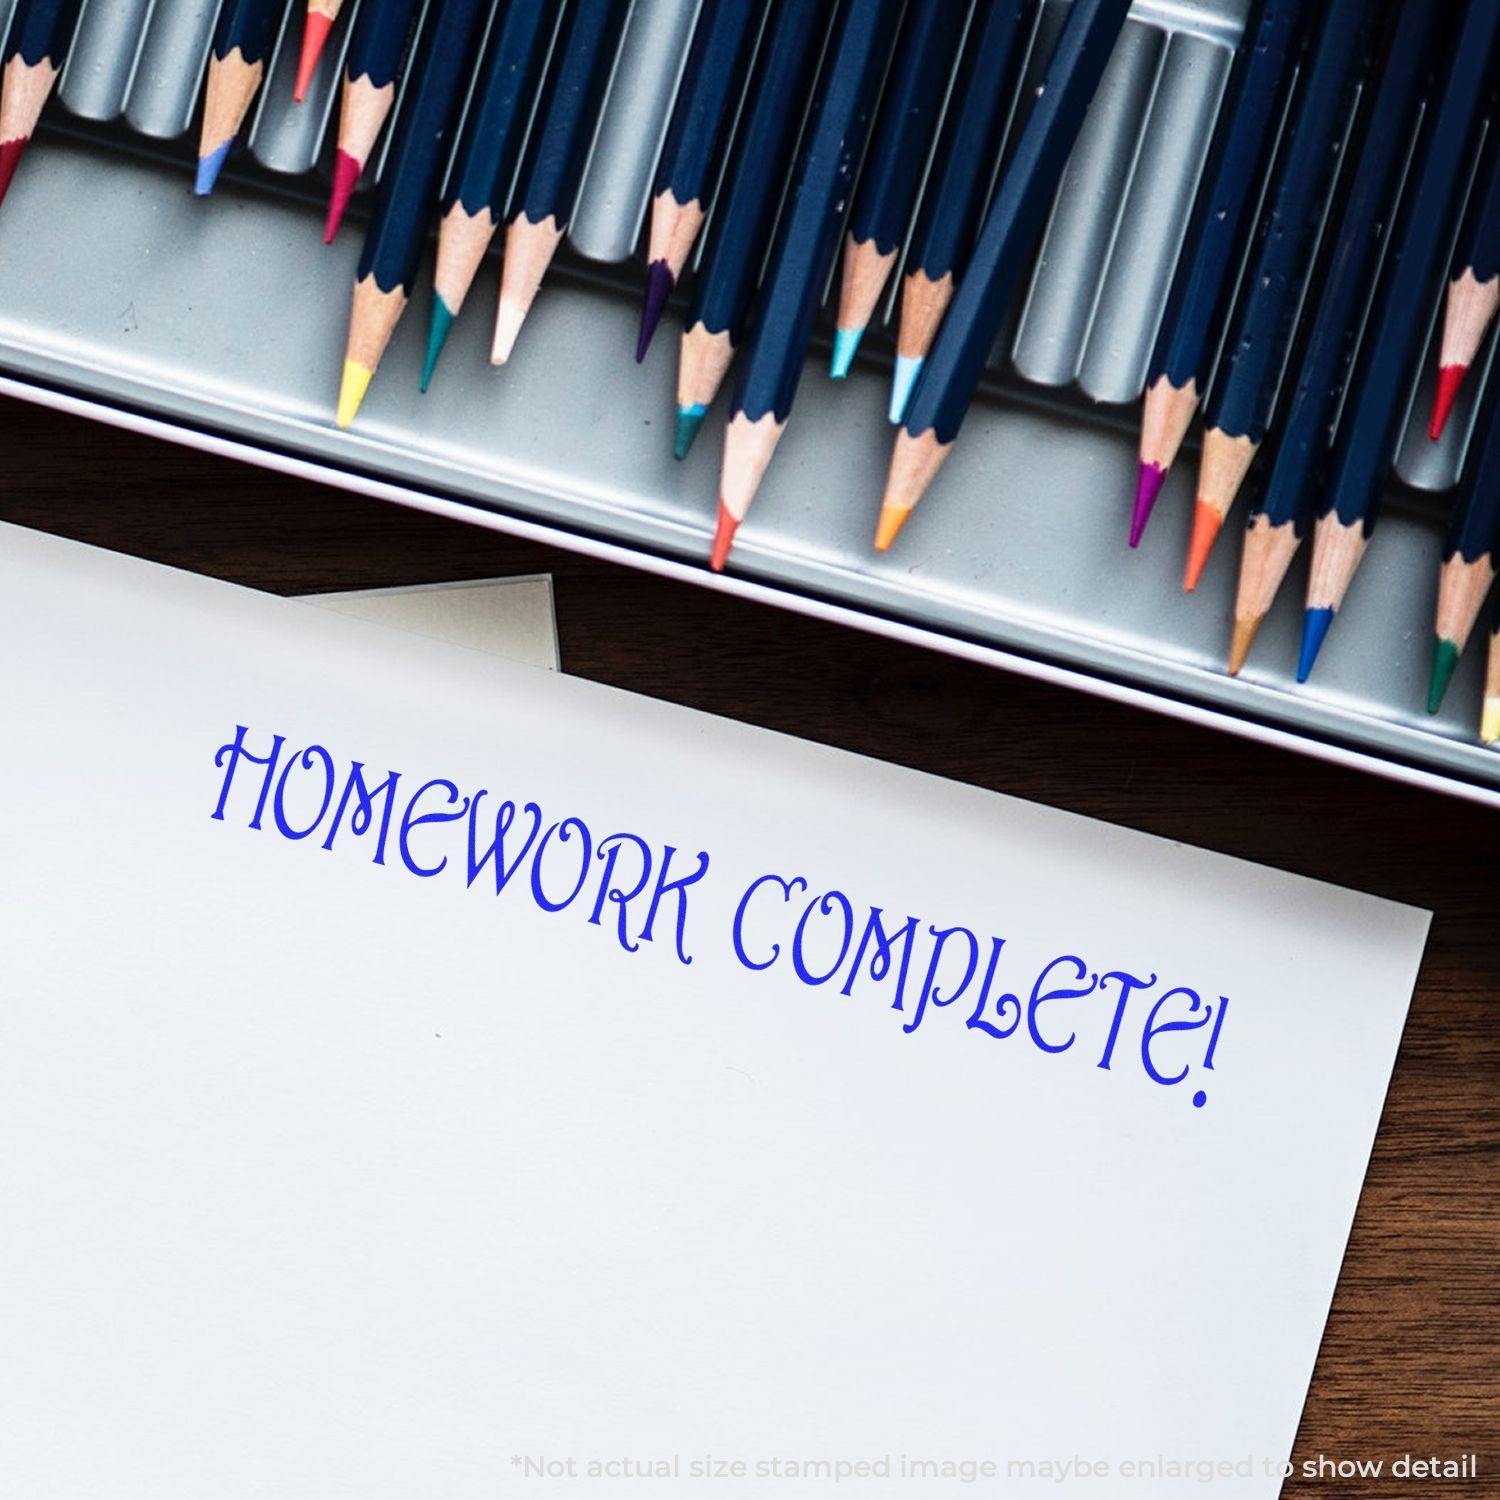 A self-inking stamp with a stamped image showing how the text "HOMEWORK COMPLETE!" in a large font is displayed by it after stamping.